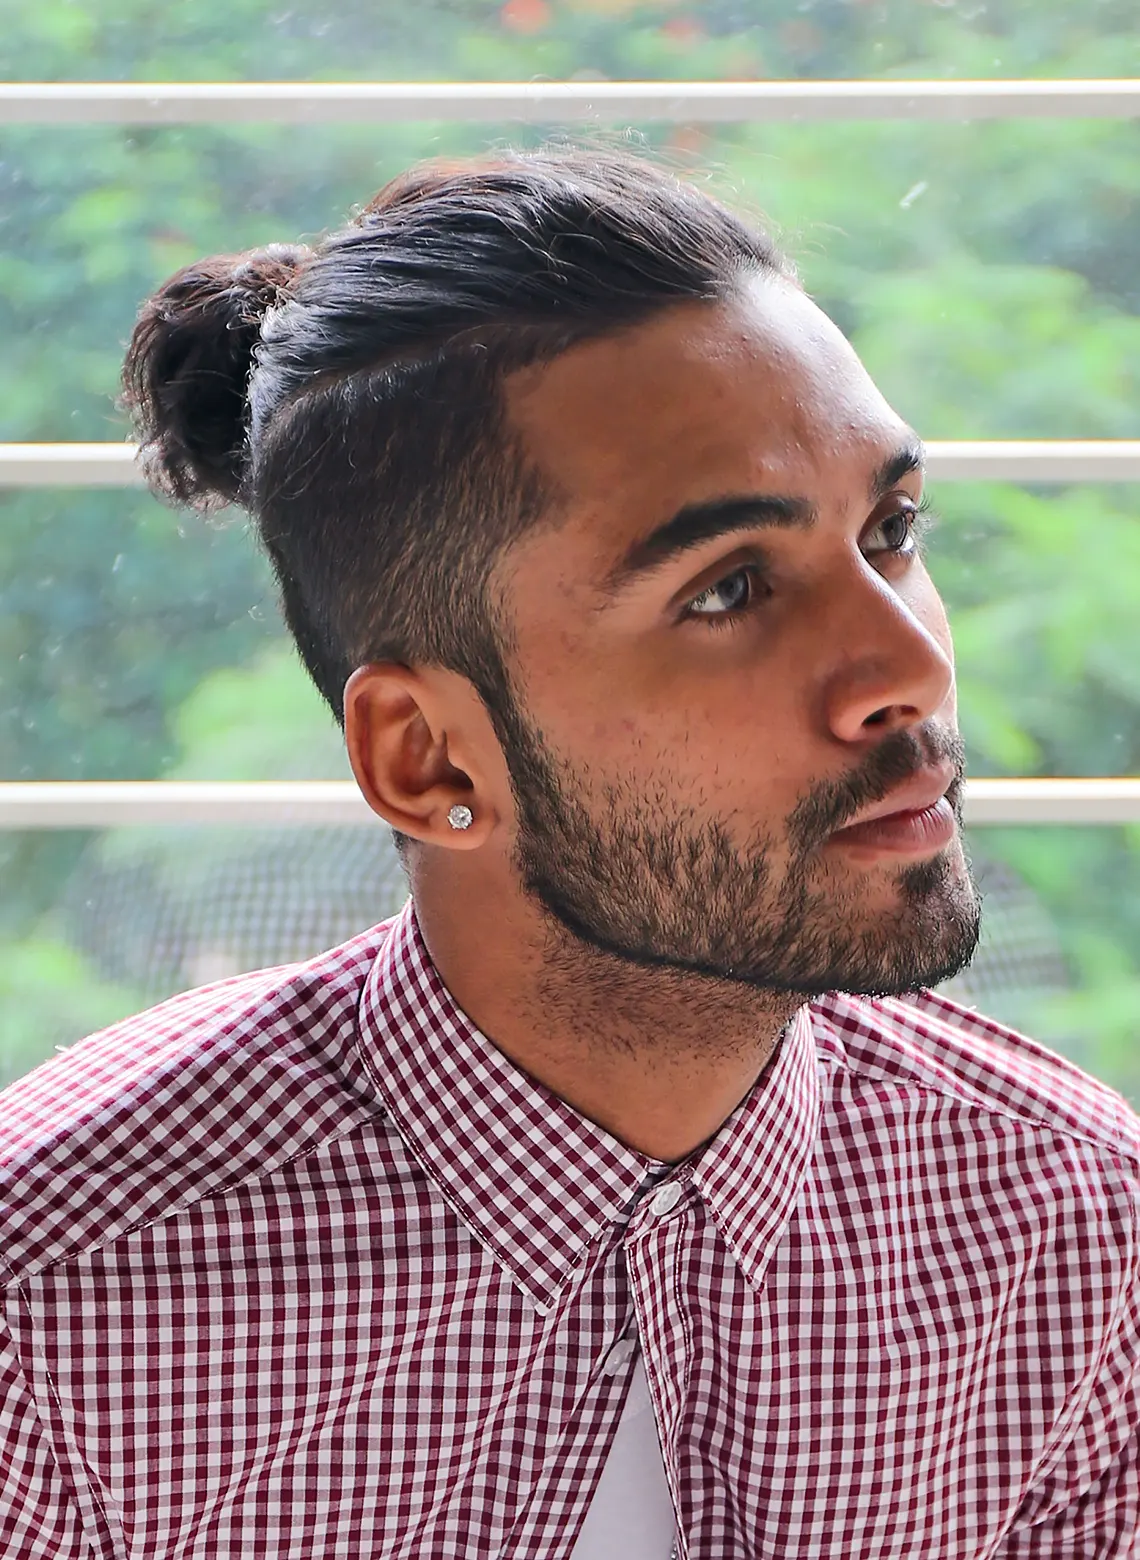 Top 51 Medium Hairstyles For Men + Styling Tips - Styleseat